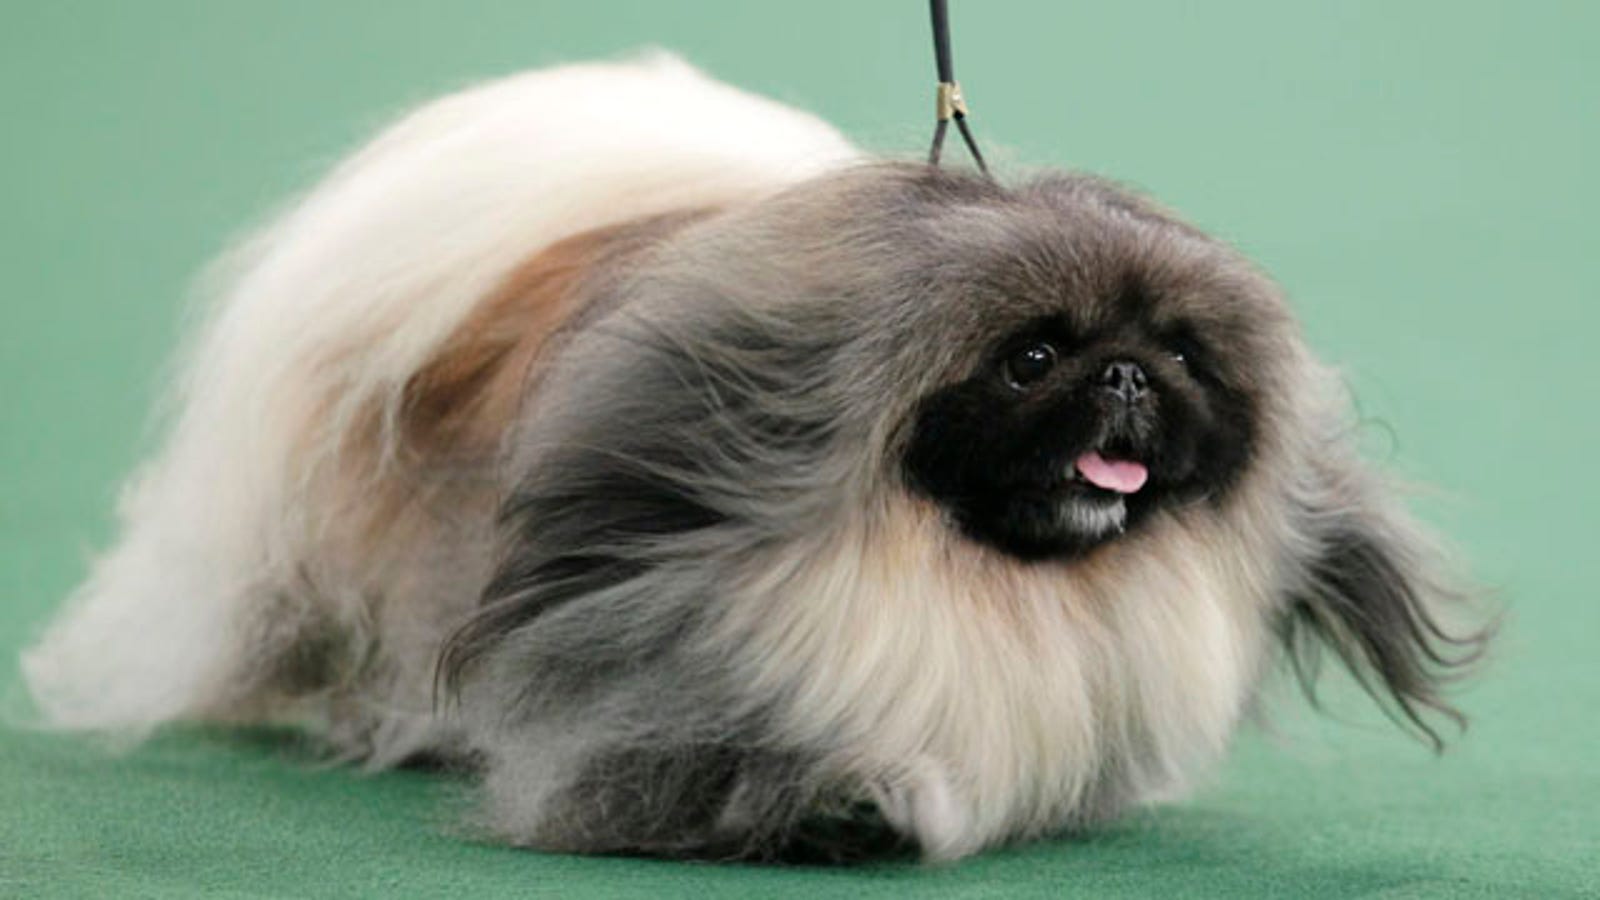 Hilariously Cute Pekingese Takes Best in Show at Westminster